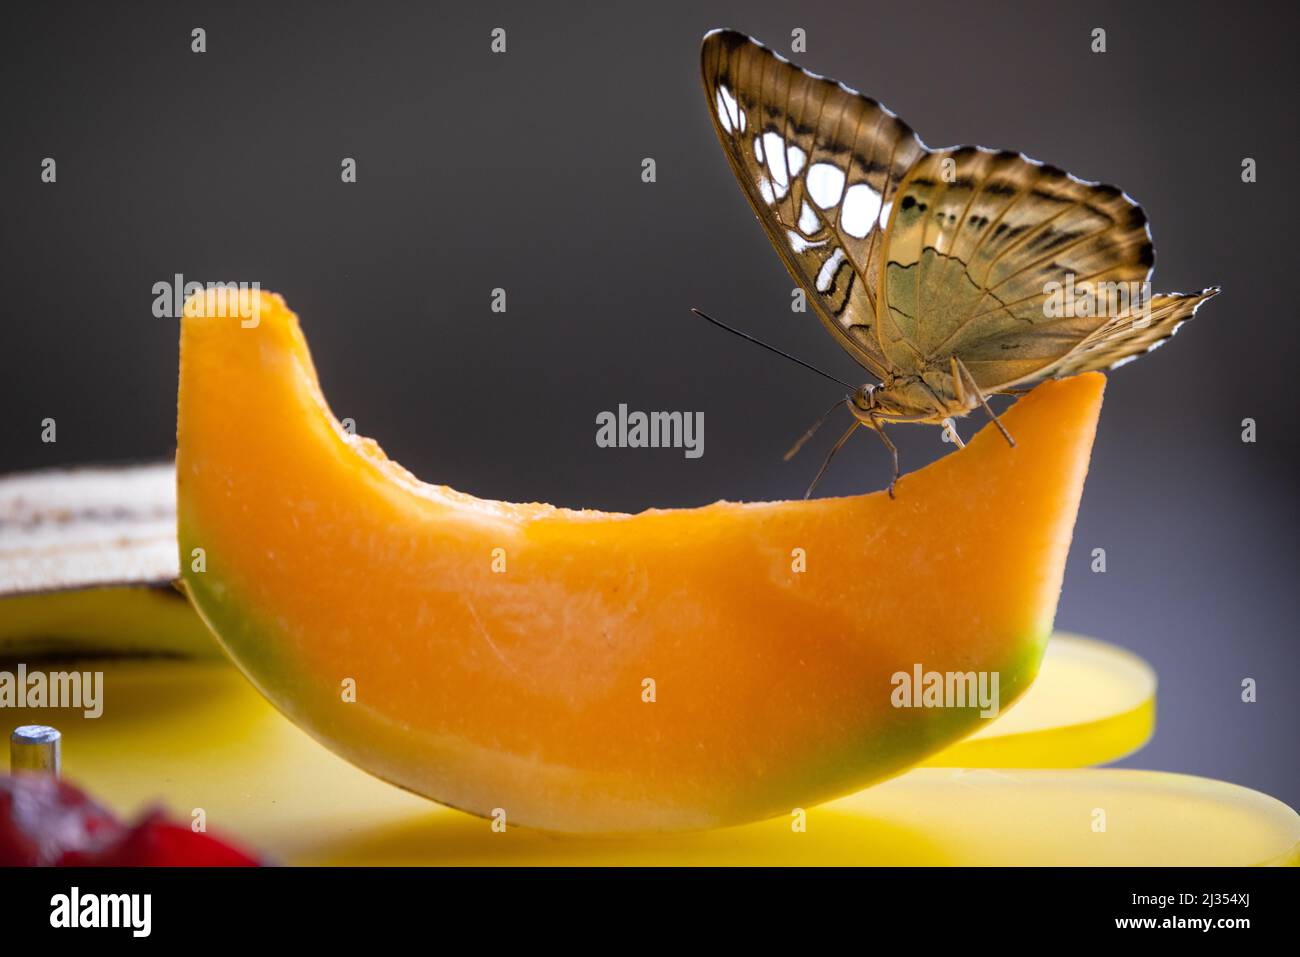 A butterfly with brown and white spotted wings is feeding on a slice of melon against a bokeh background Stock Photo